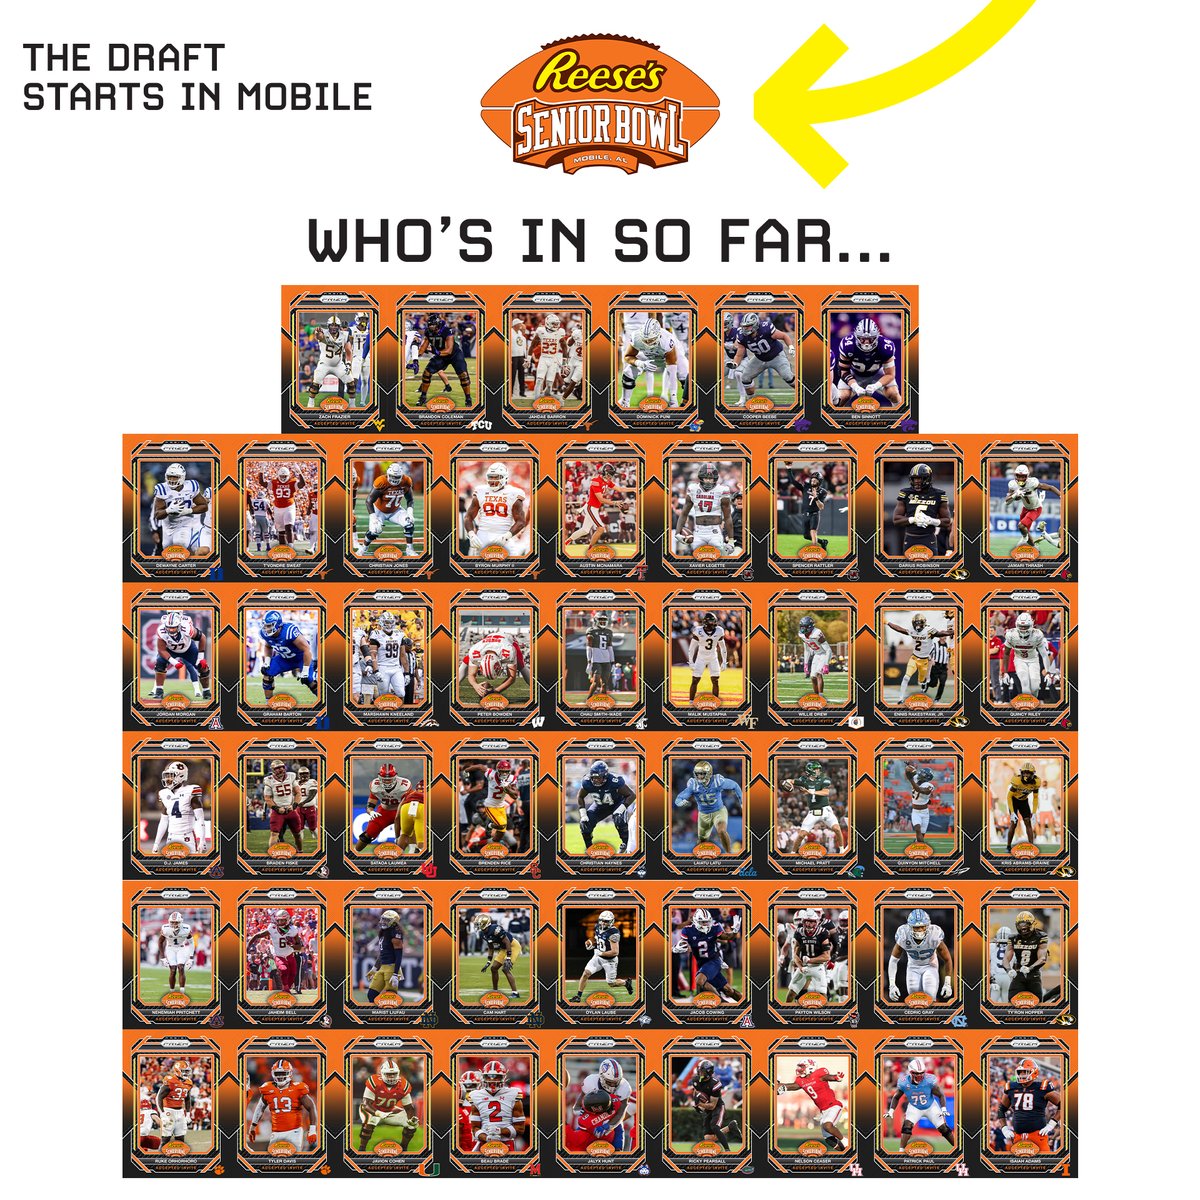 Want to catch up on all the 2024 Reese's Senior Bowl accepted invites? #BestOfTheBest #TheDraftStartsInMOBILE™️ Link: seniorbowl.com/accepted-invit… @PaniniAmerica #RatedRookie